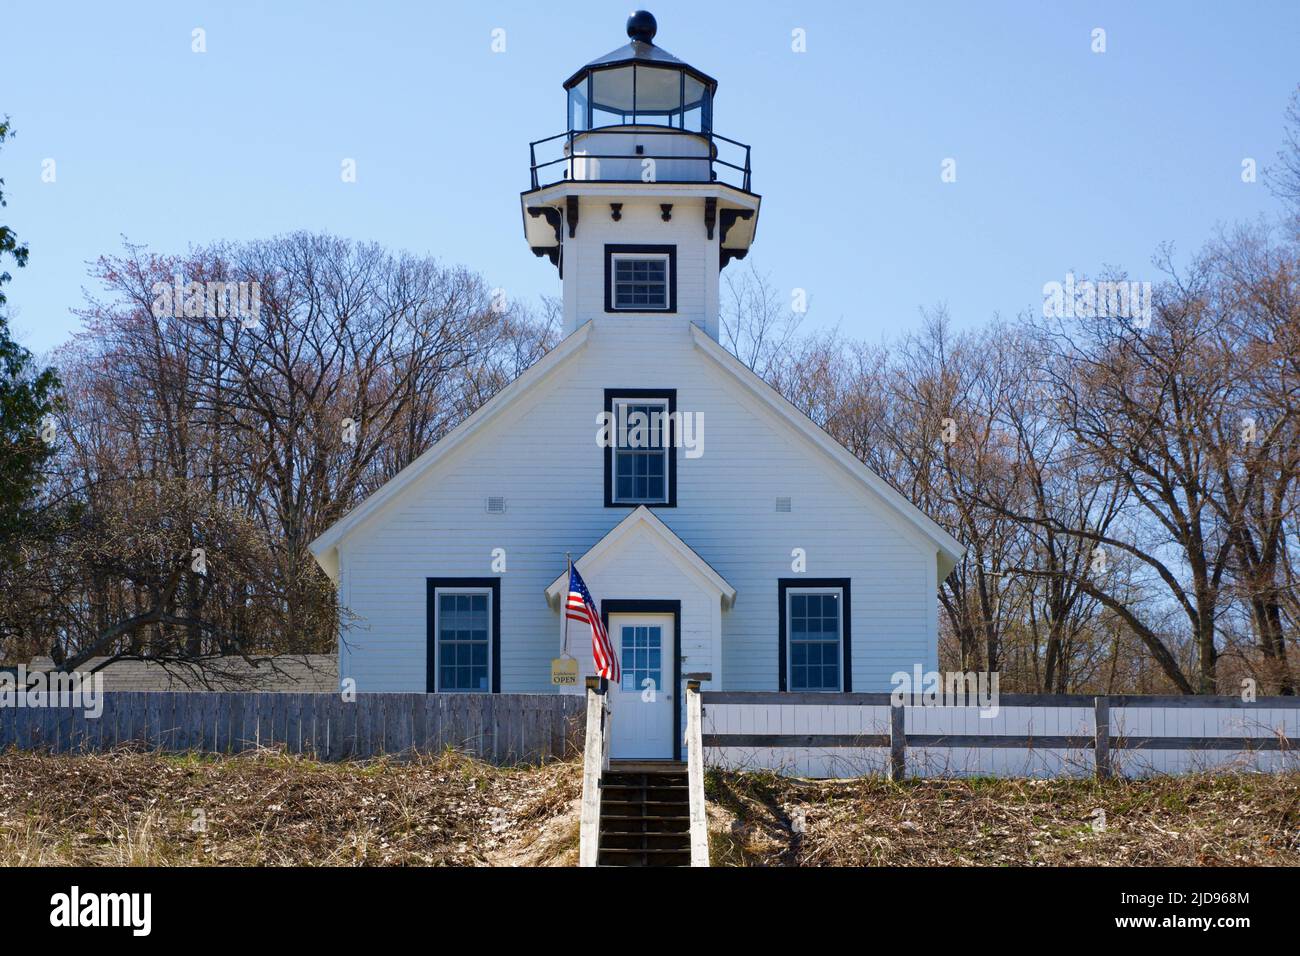 TRAVERSE CITY, MICHIGAN, UNITED STATES - 16 May 2018: Exterior view of Mission Point Lighthouse in Northern Michigan Stock Photo